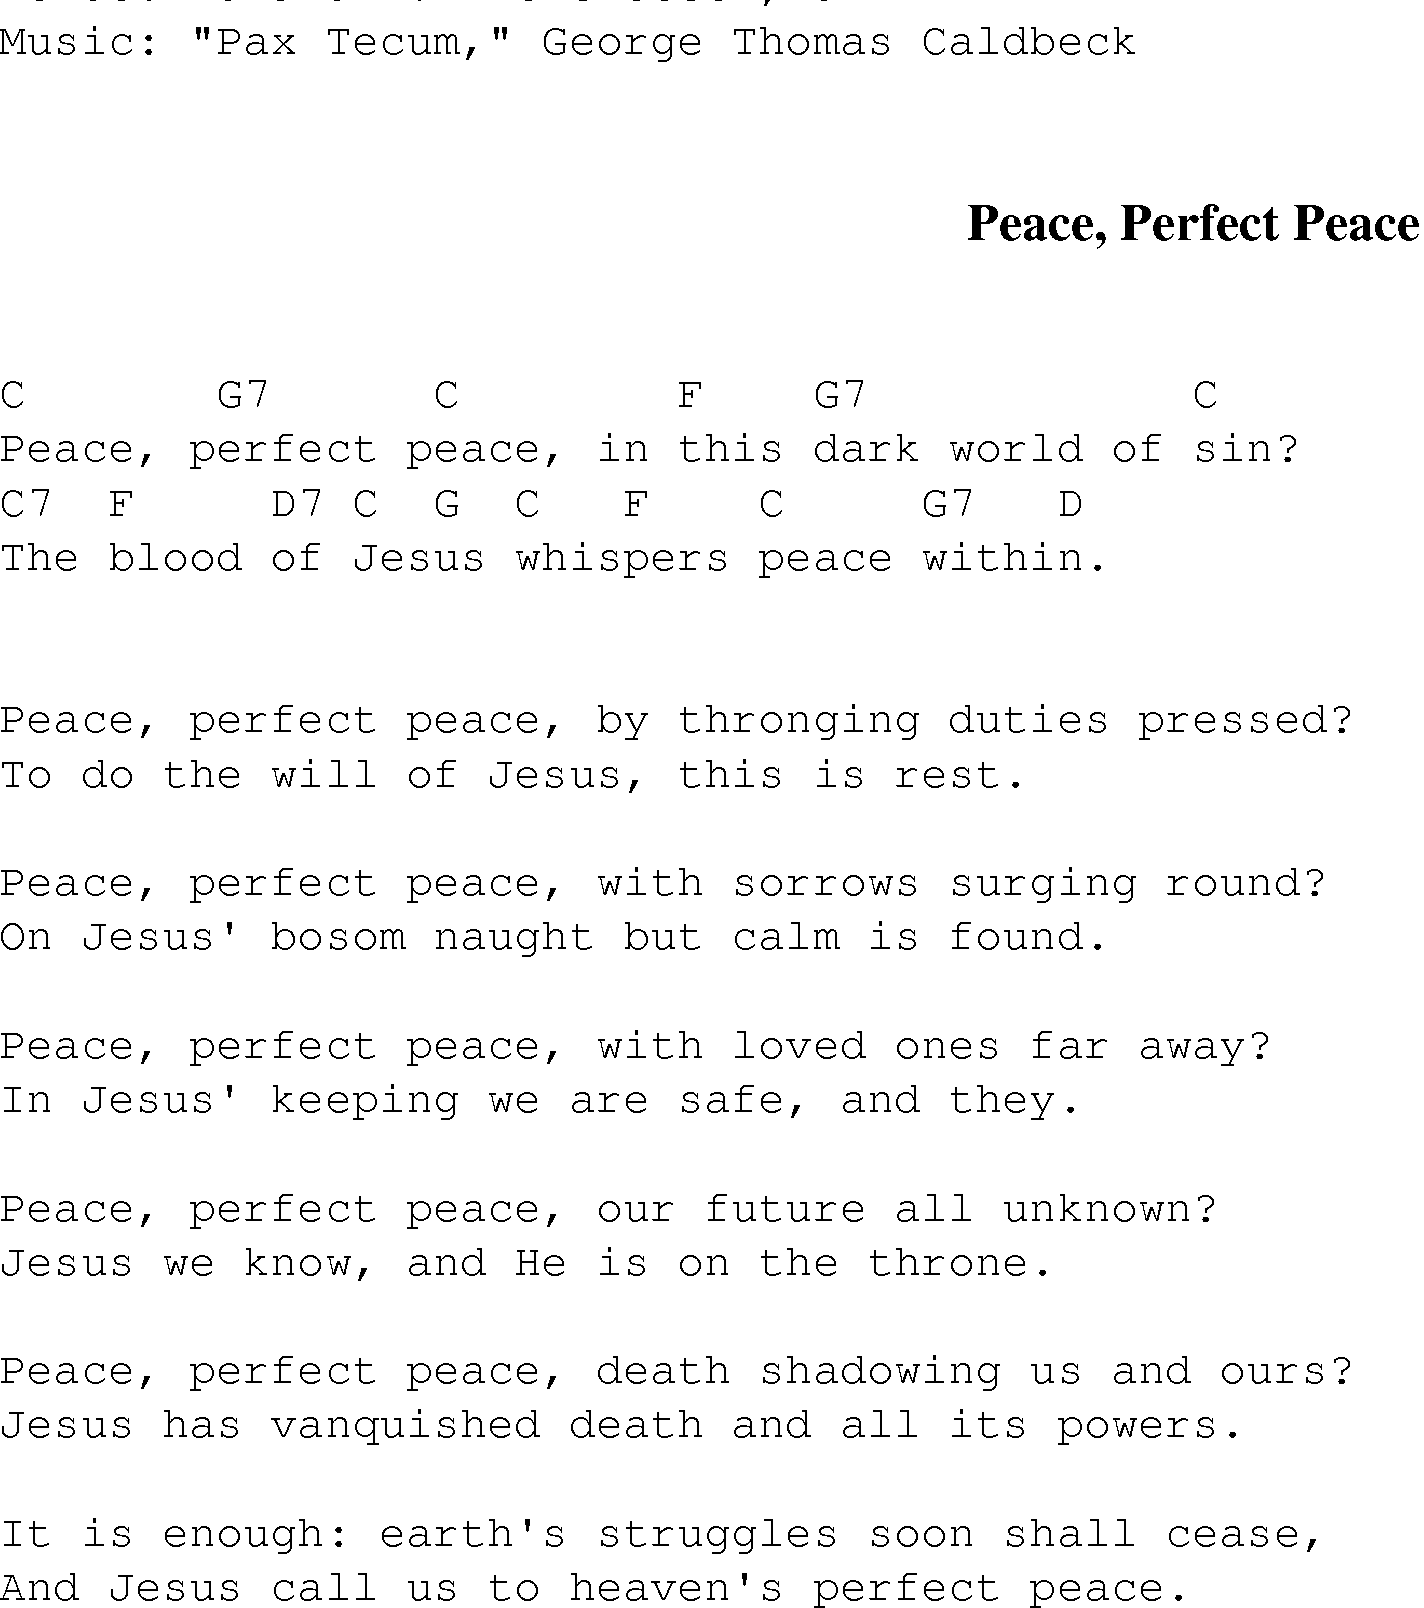 Gospel Song: peace_perfect_peace, lyrics and chords.